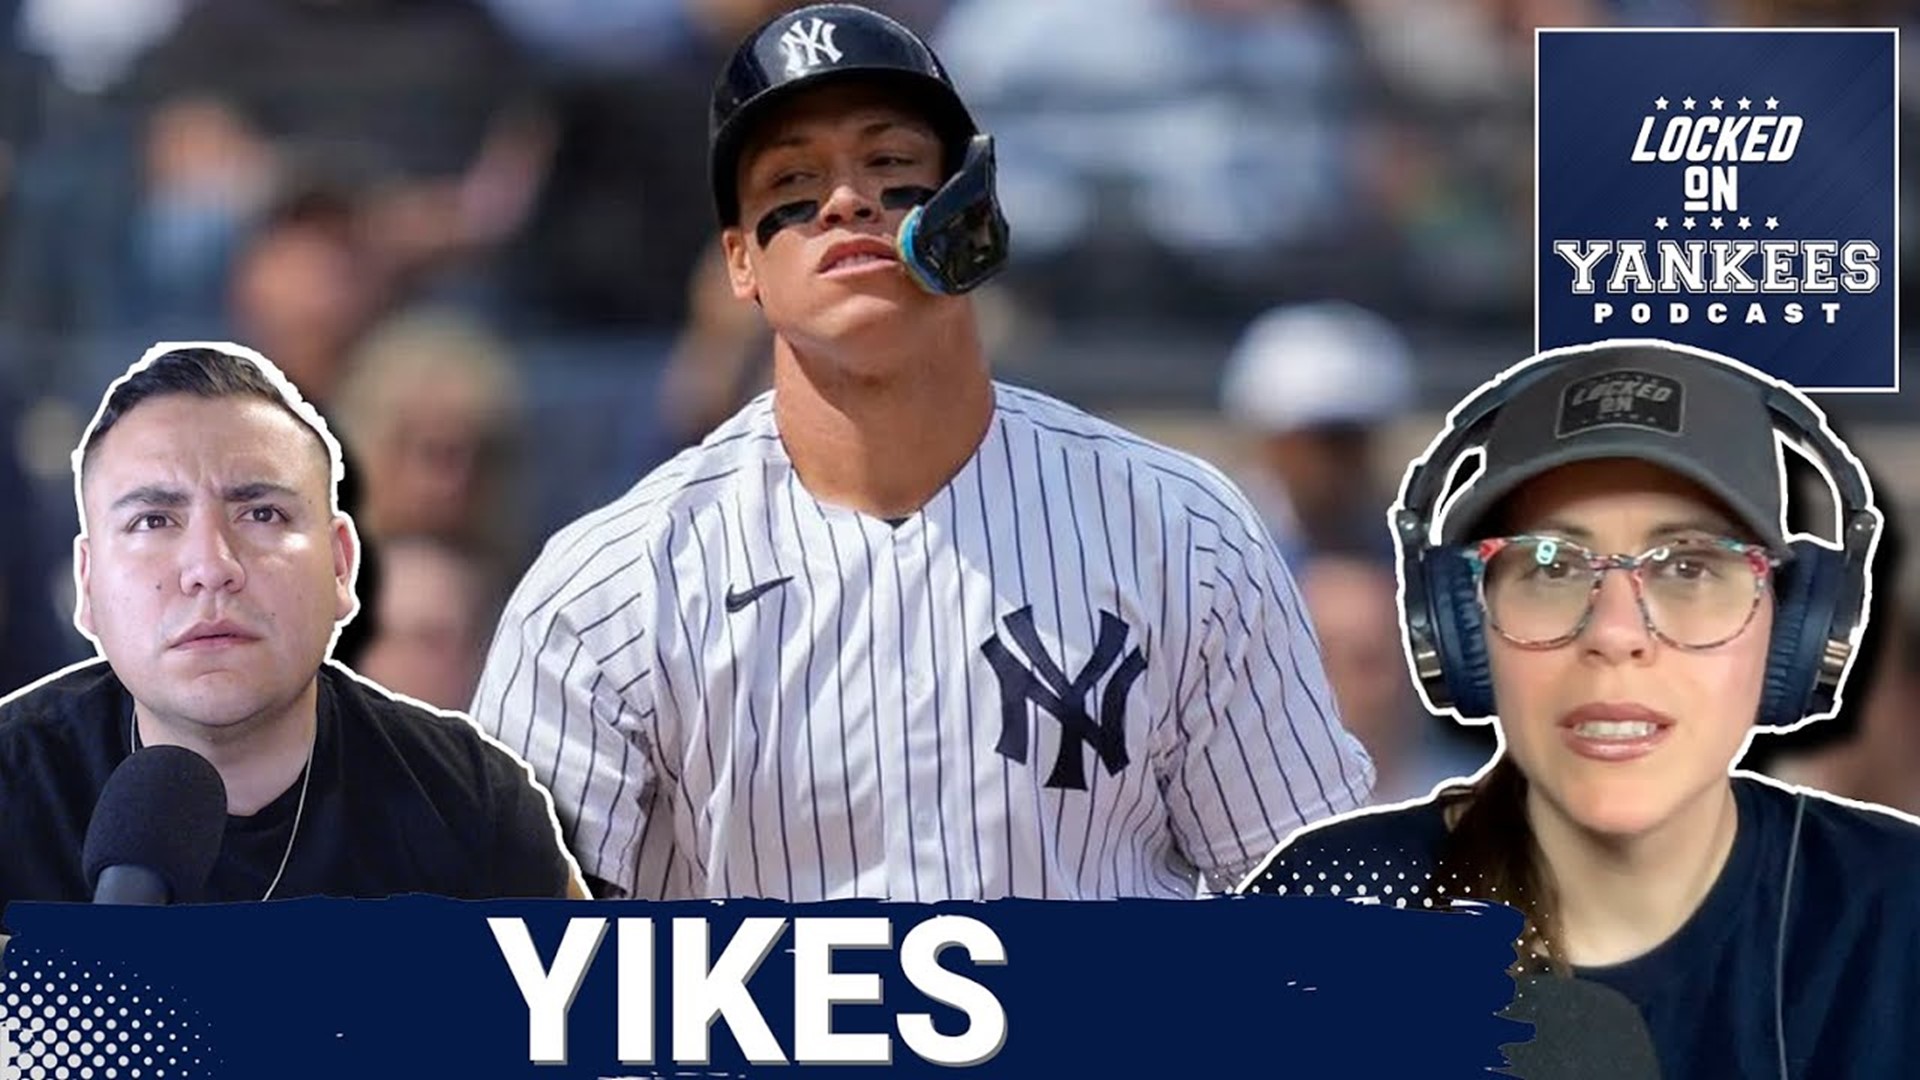 The New York Yankees dropped the first game of the series  to the Minnesota Twins, 6-1 on Monday night thanks in big part to an anemic offense.